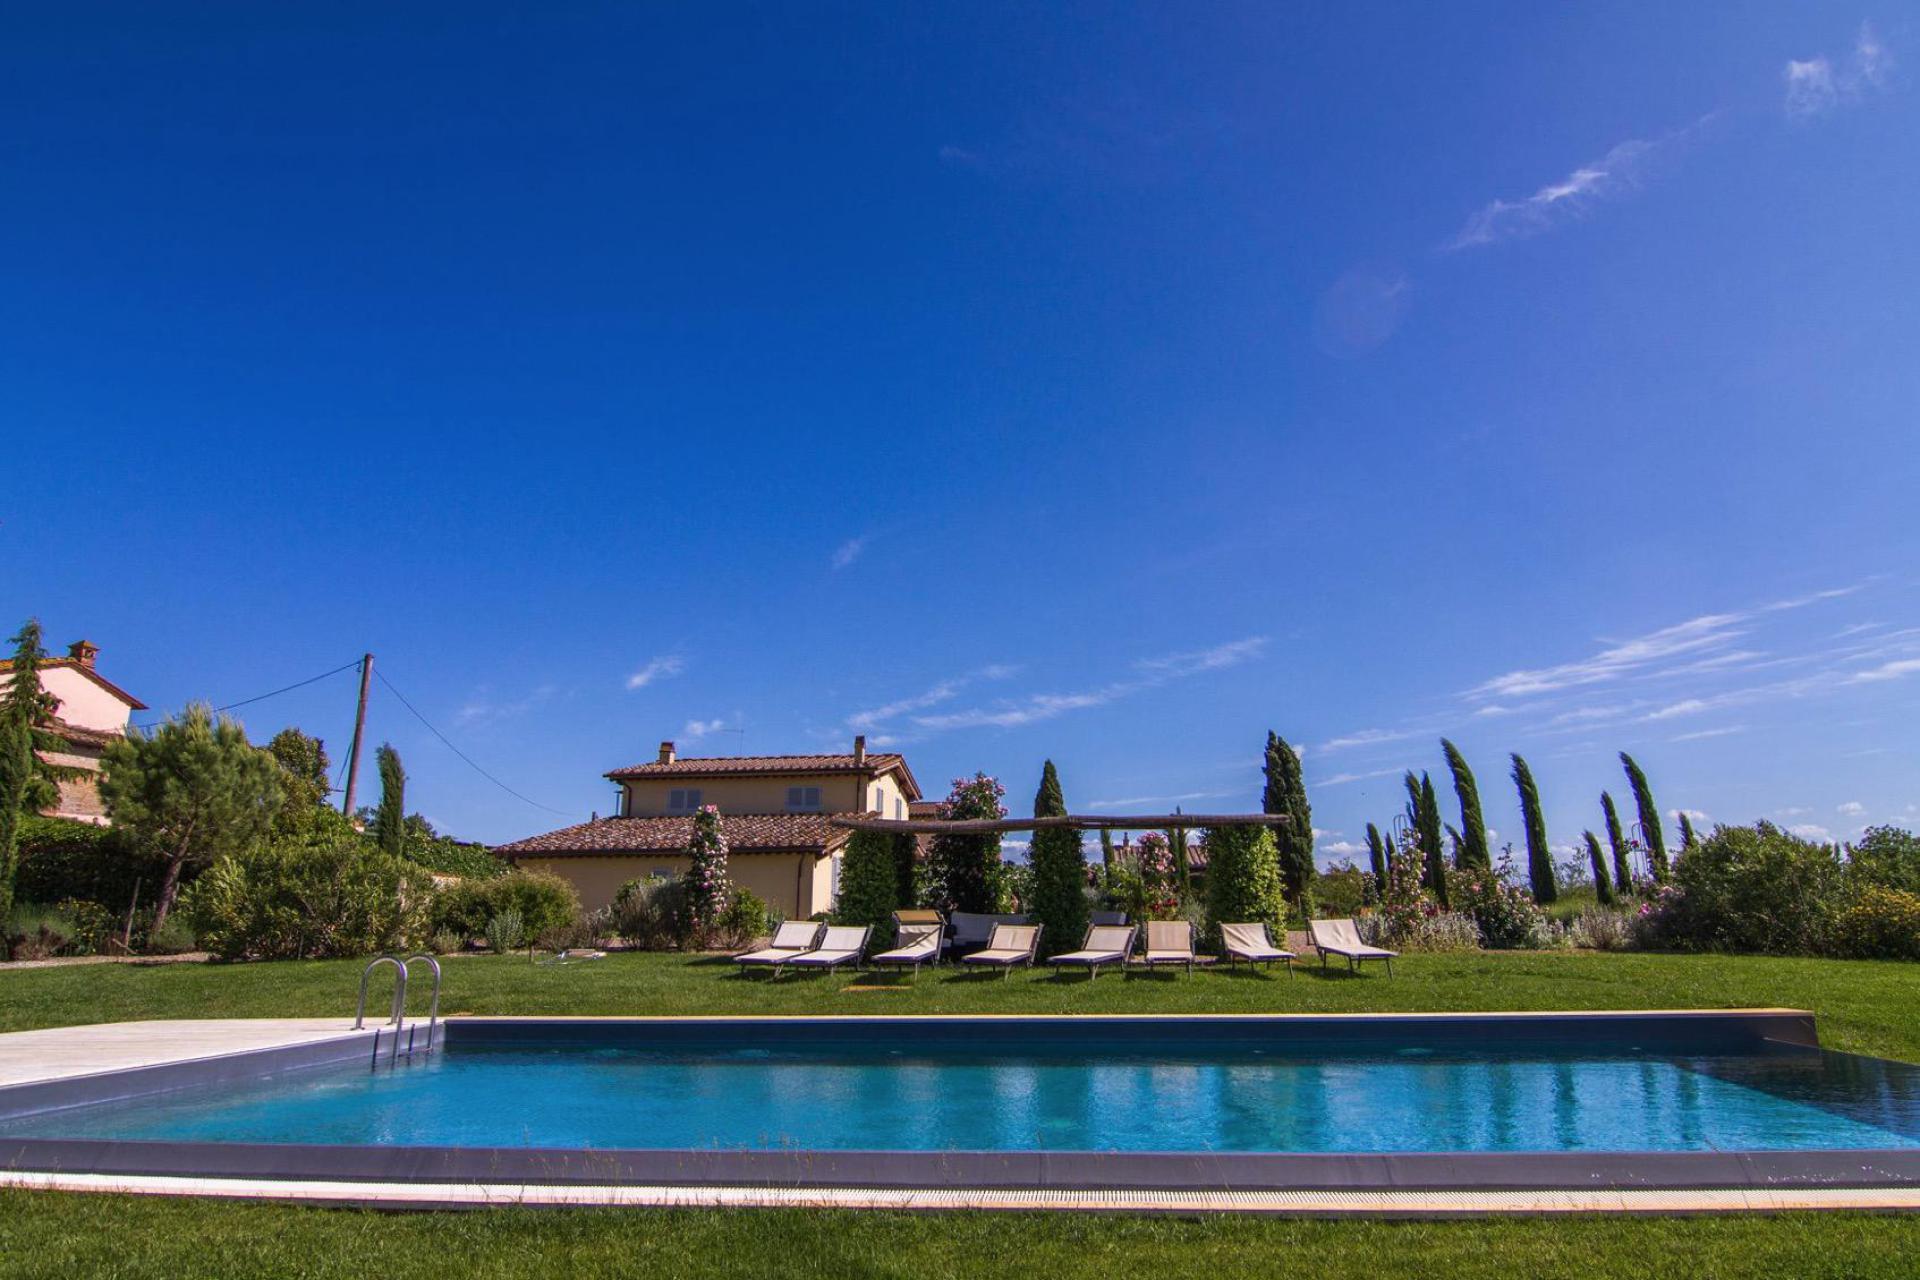 Agriturismo Siena, luxury apartments and swimming pool